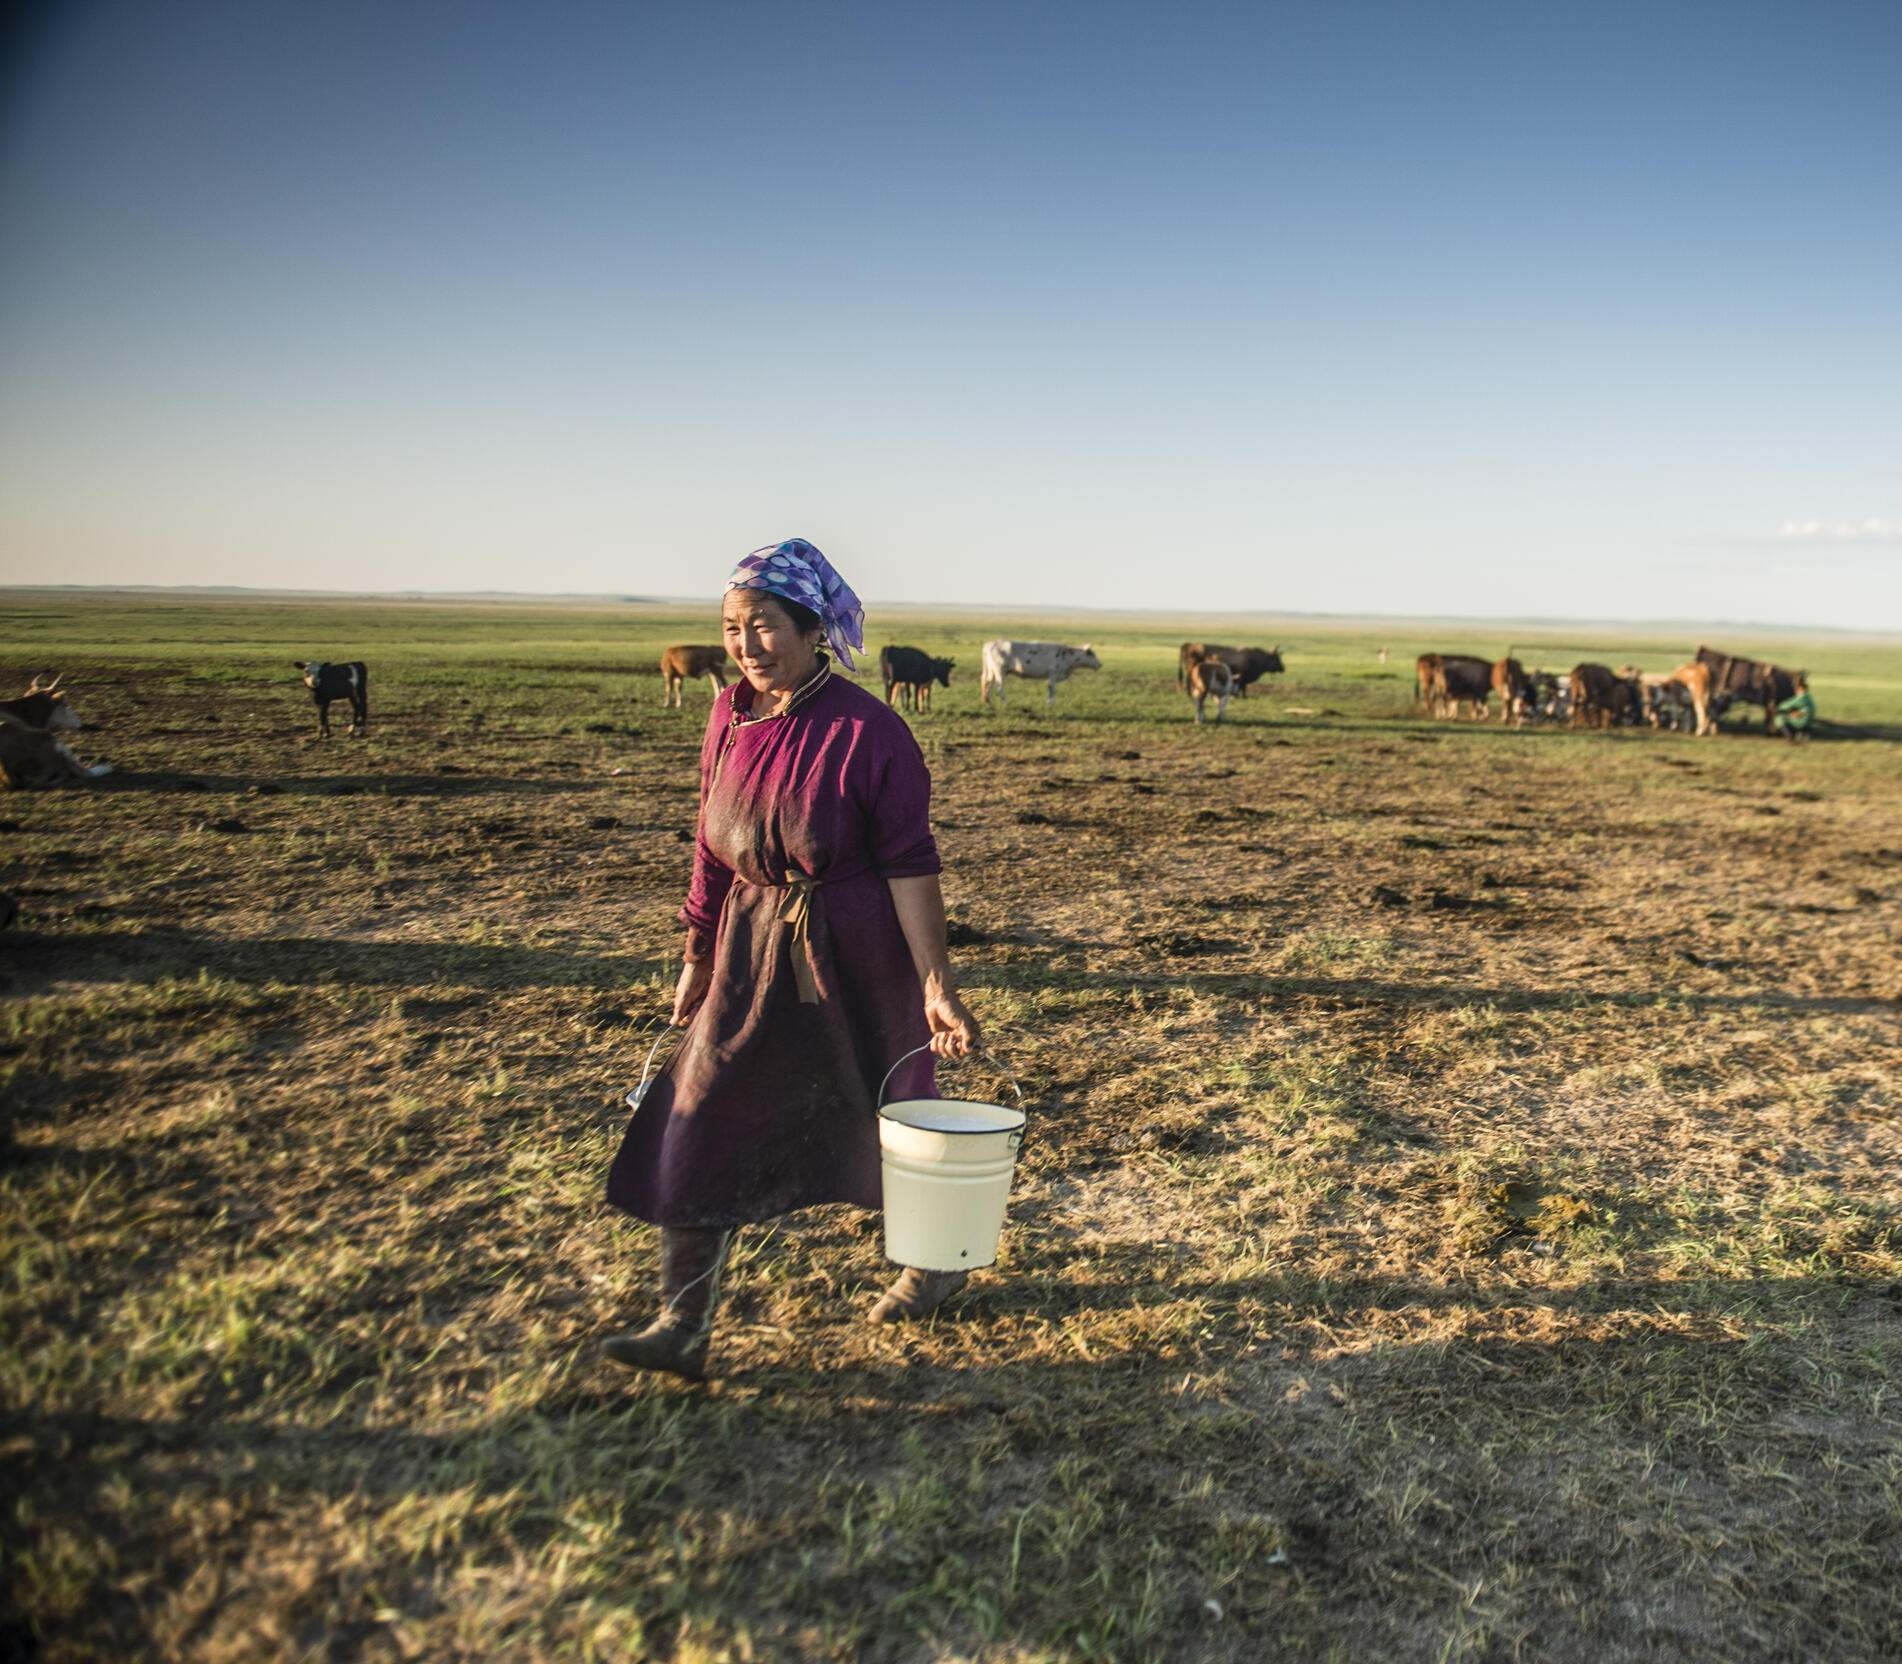 Woman carrying bucket on farmland with cows.